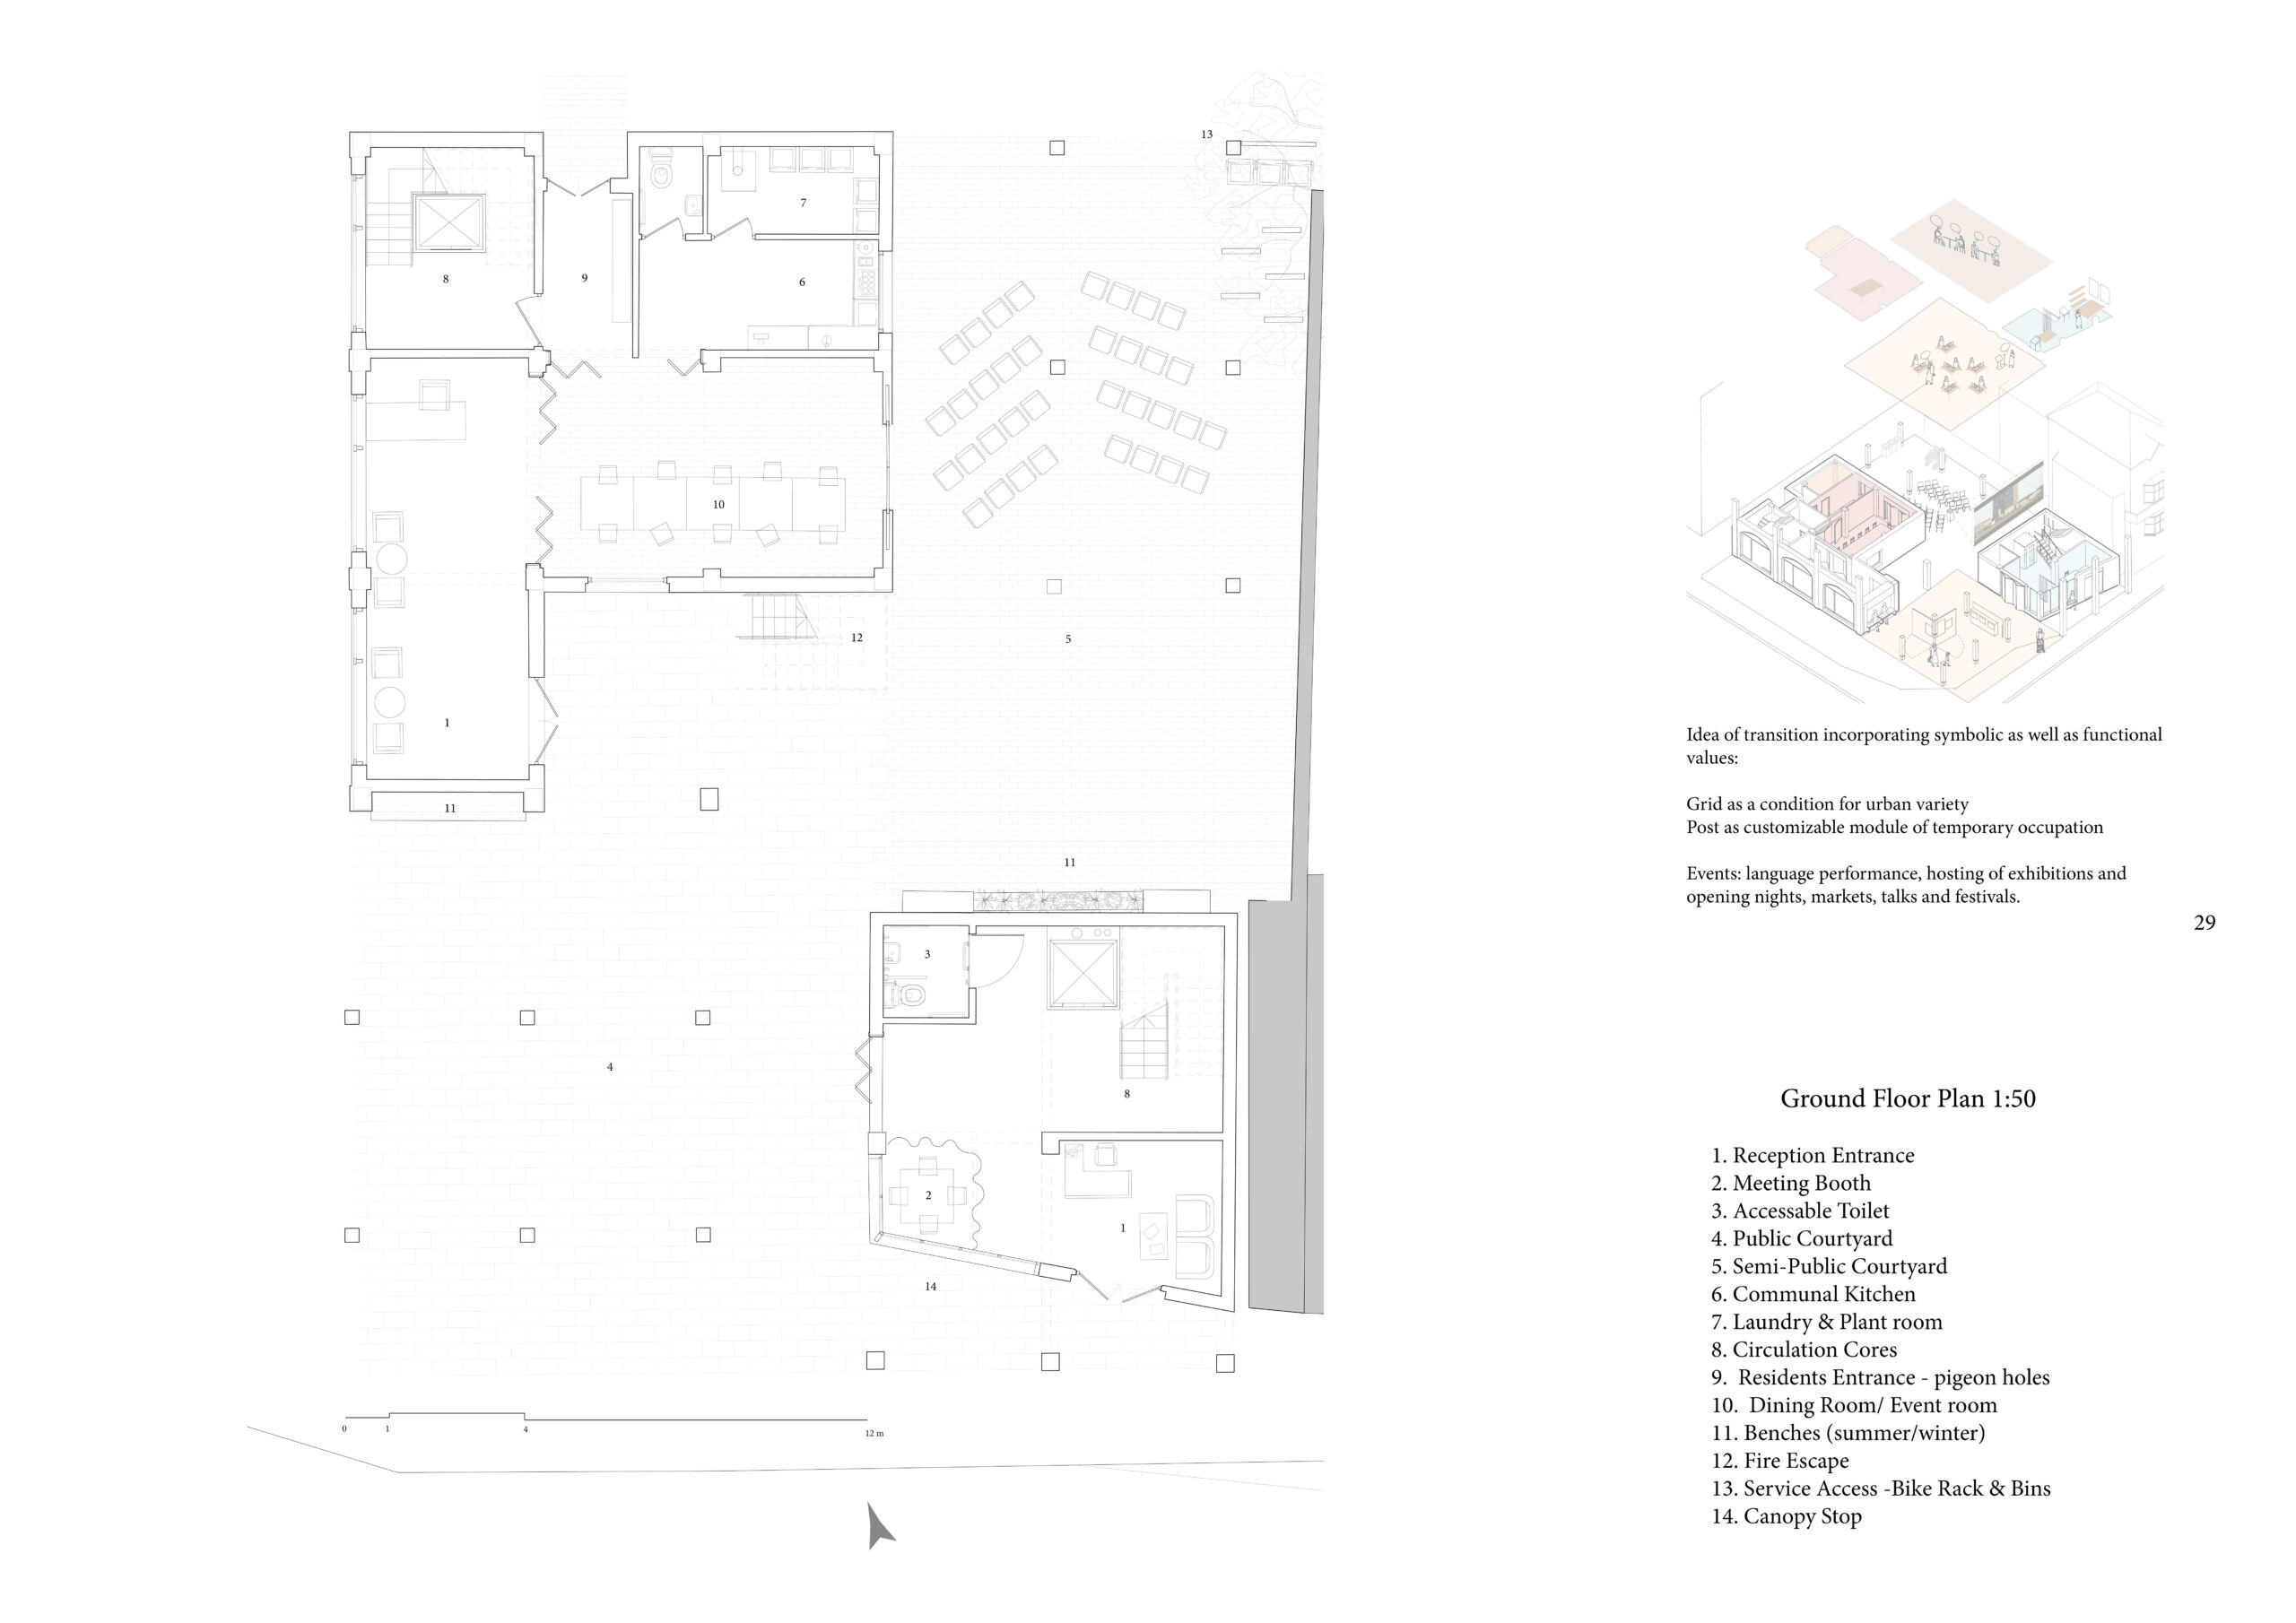 ground floor plan and variations of events